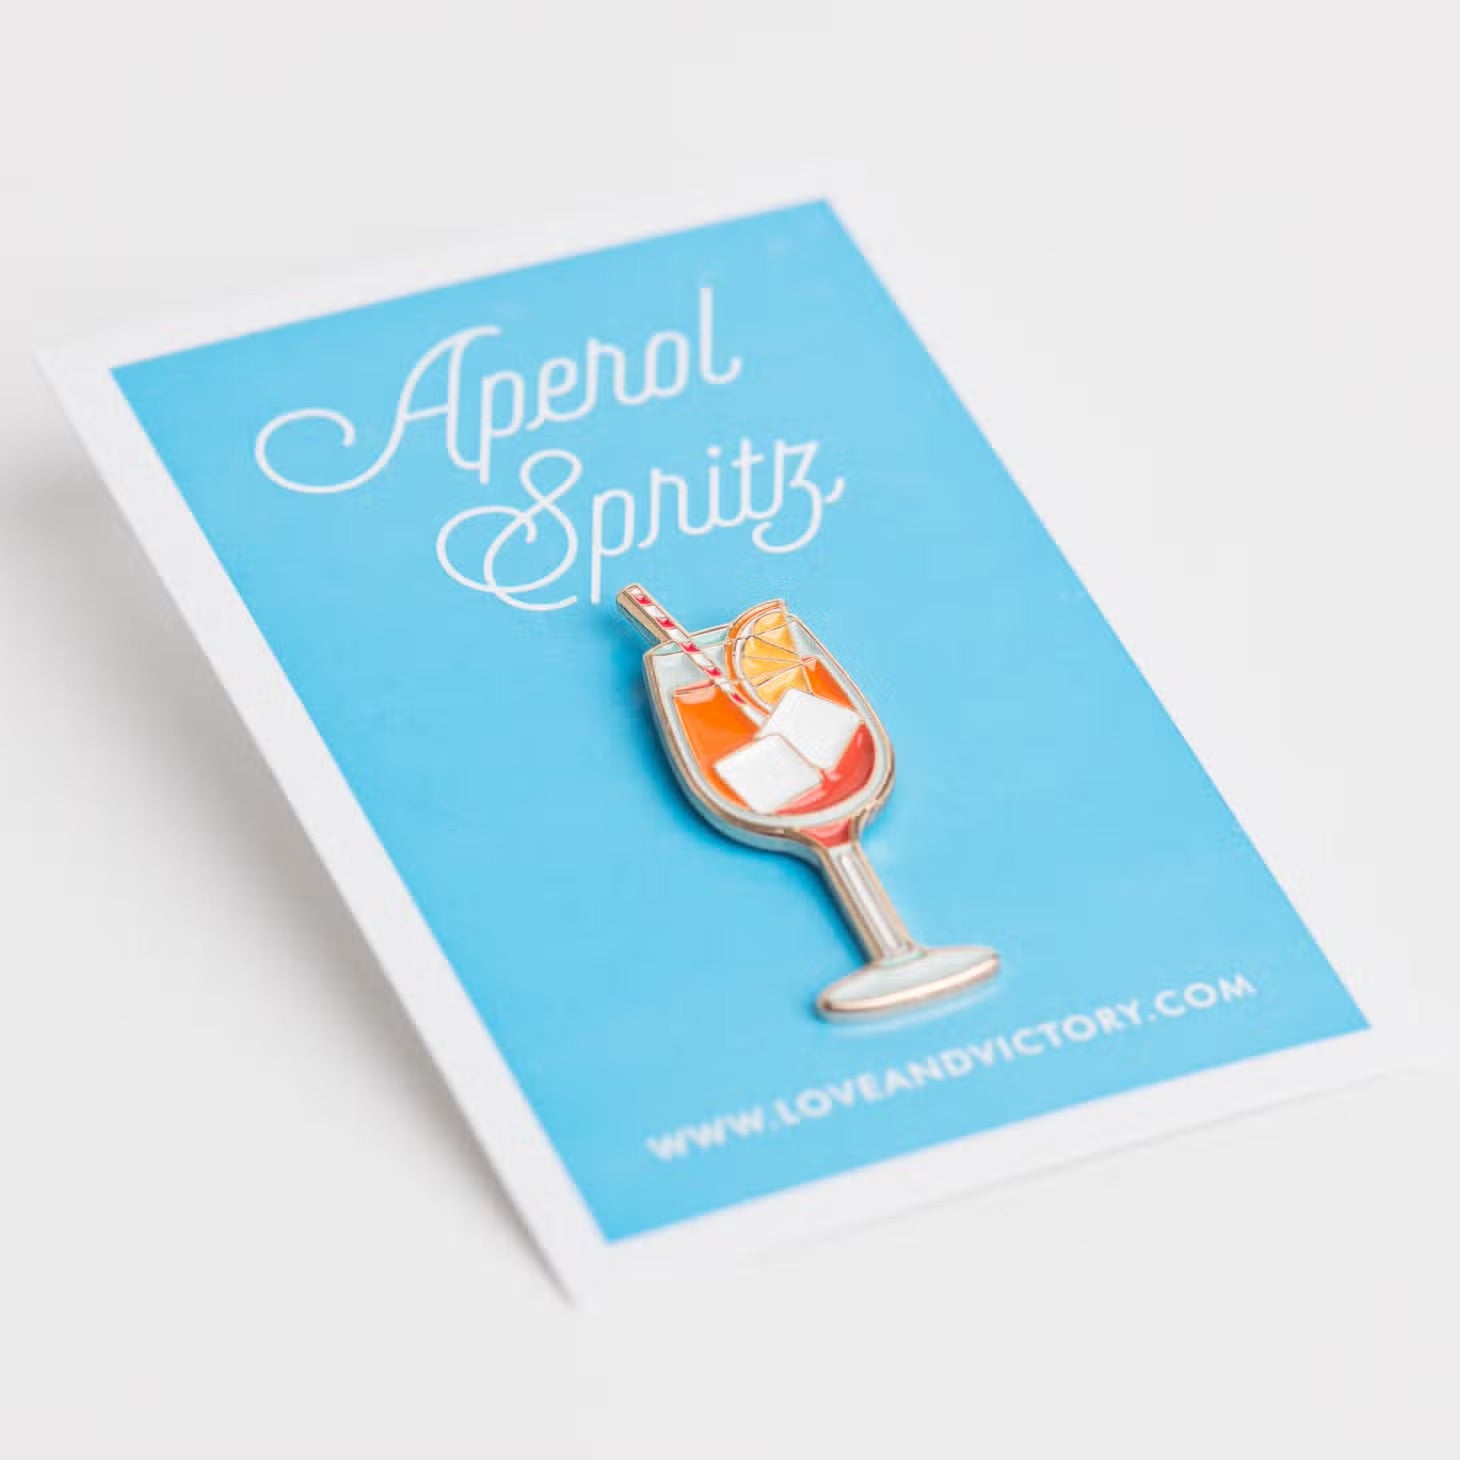 Aperol Spritz lapel pin on baby blue card backing.